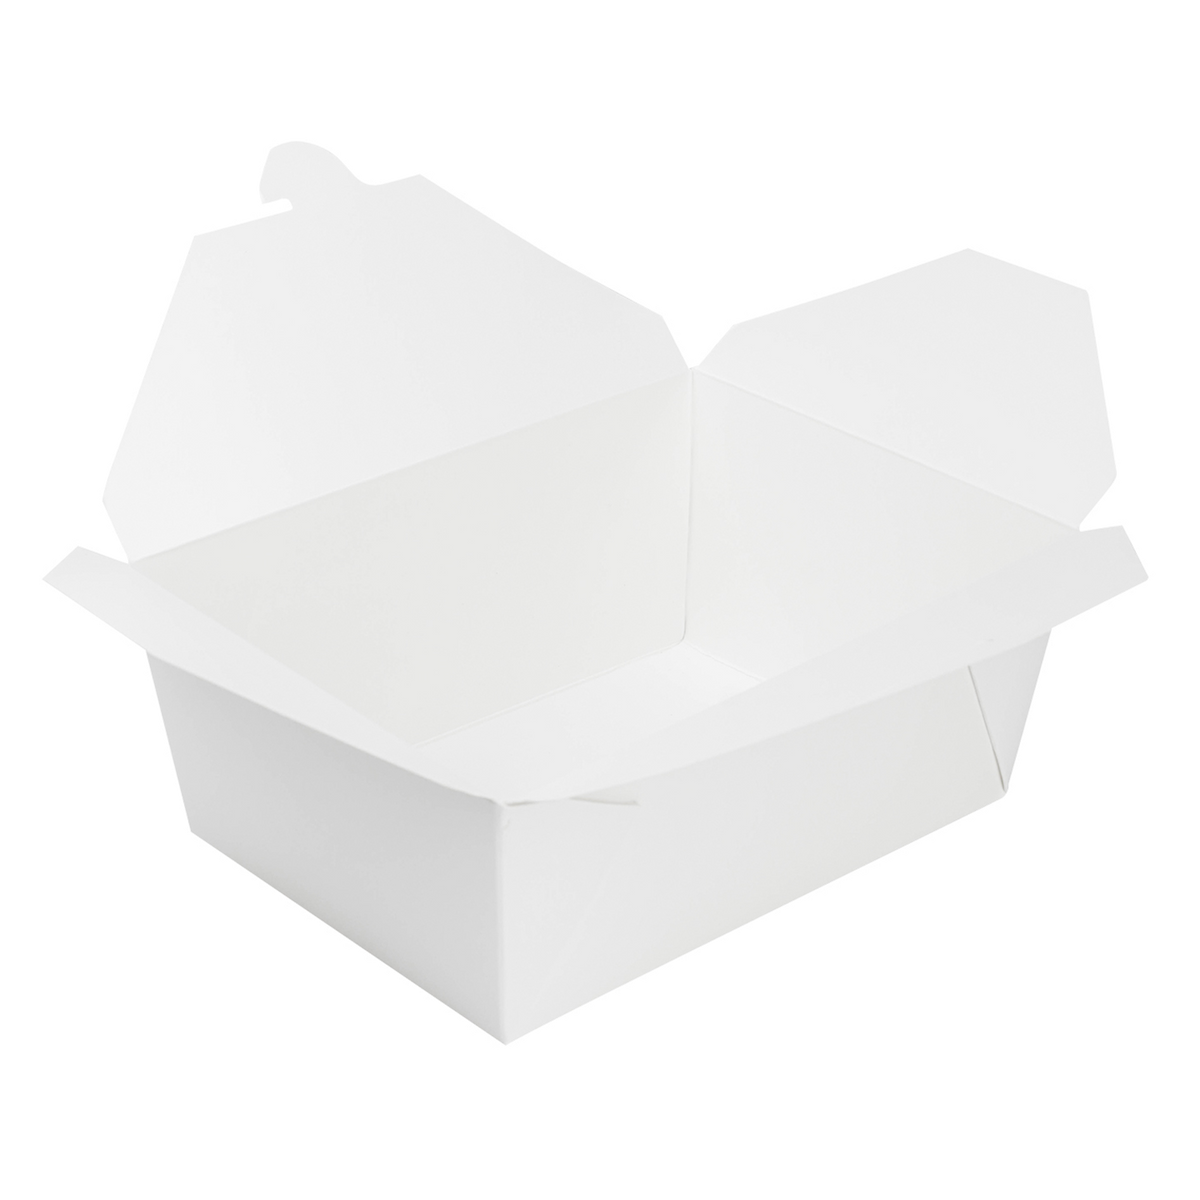 https://www.restaurantsupplydrops.shop/wp-content/uploads/1689/34/white-microwavable-folded-paper-4-take-out-container-karat-extra-large-fold-to-go-box-110oz-7-8-x-5-5-x-3-5-160-count-karat-shop-smarter-live-better-get-the-best-deals-and-discounts_1.png